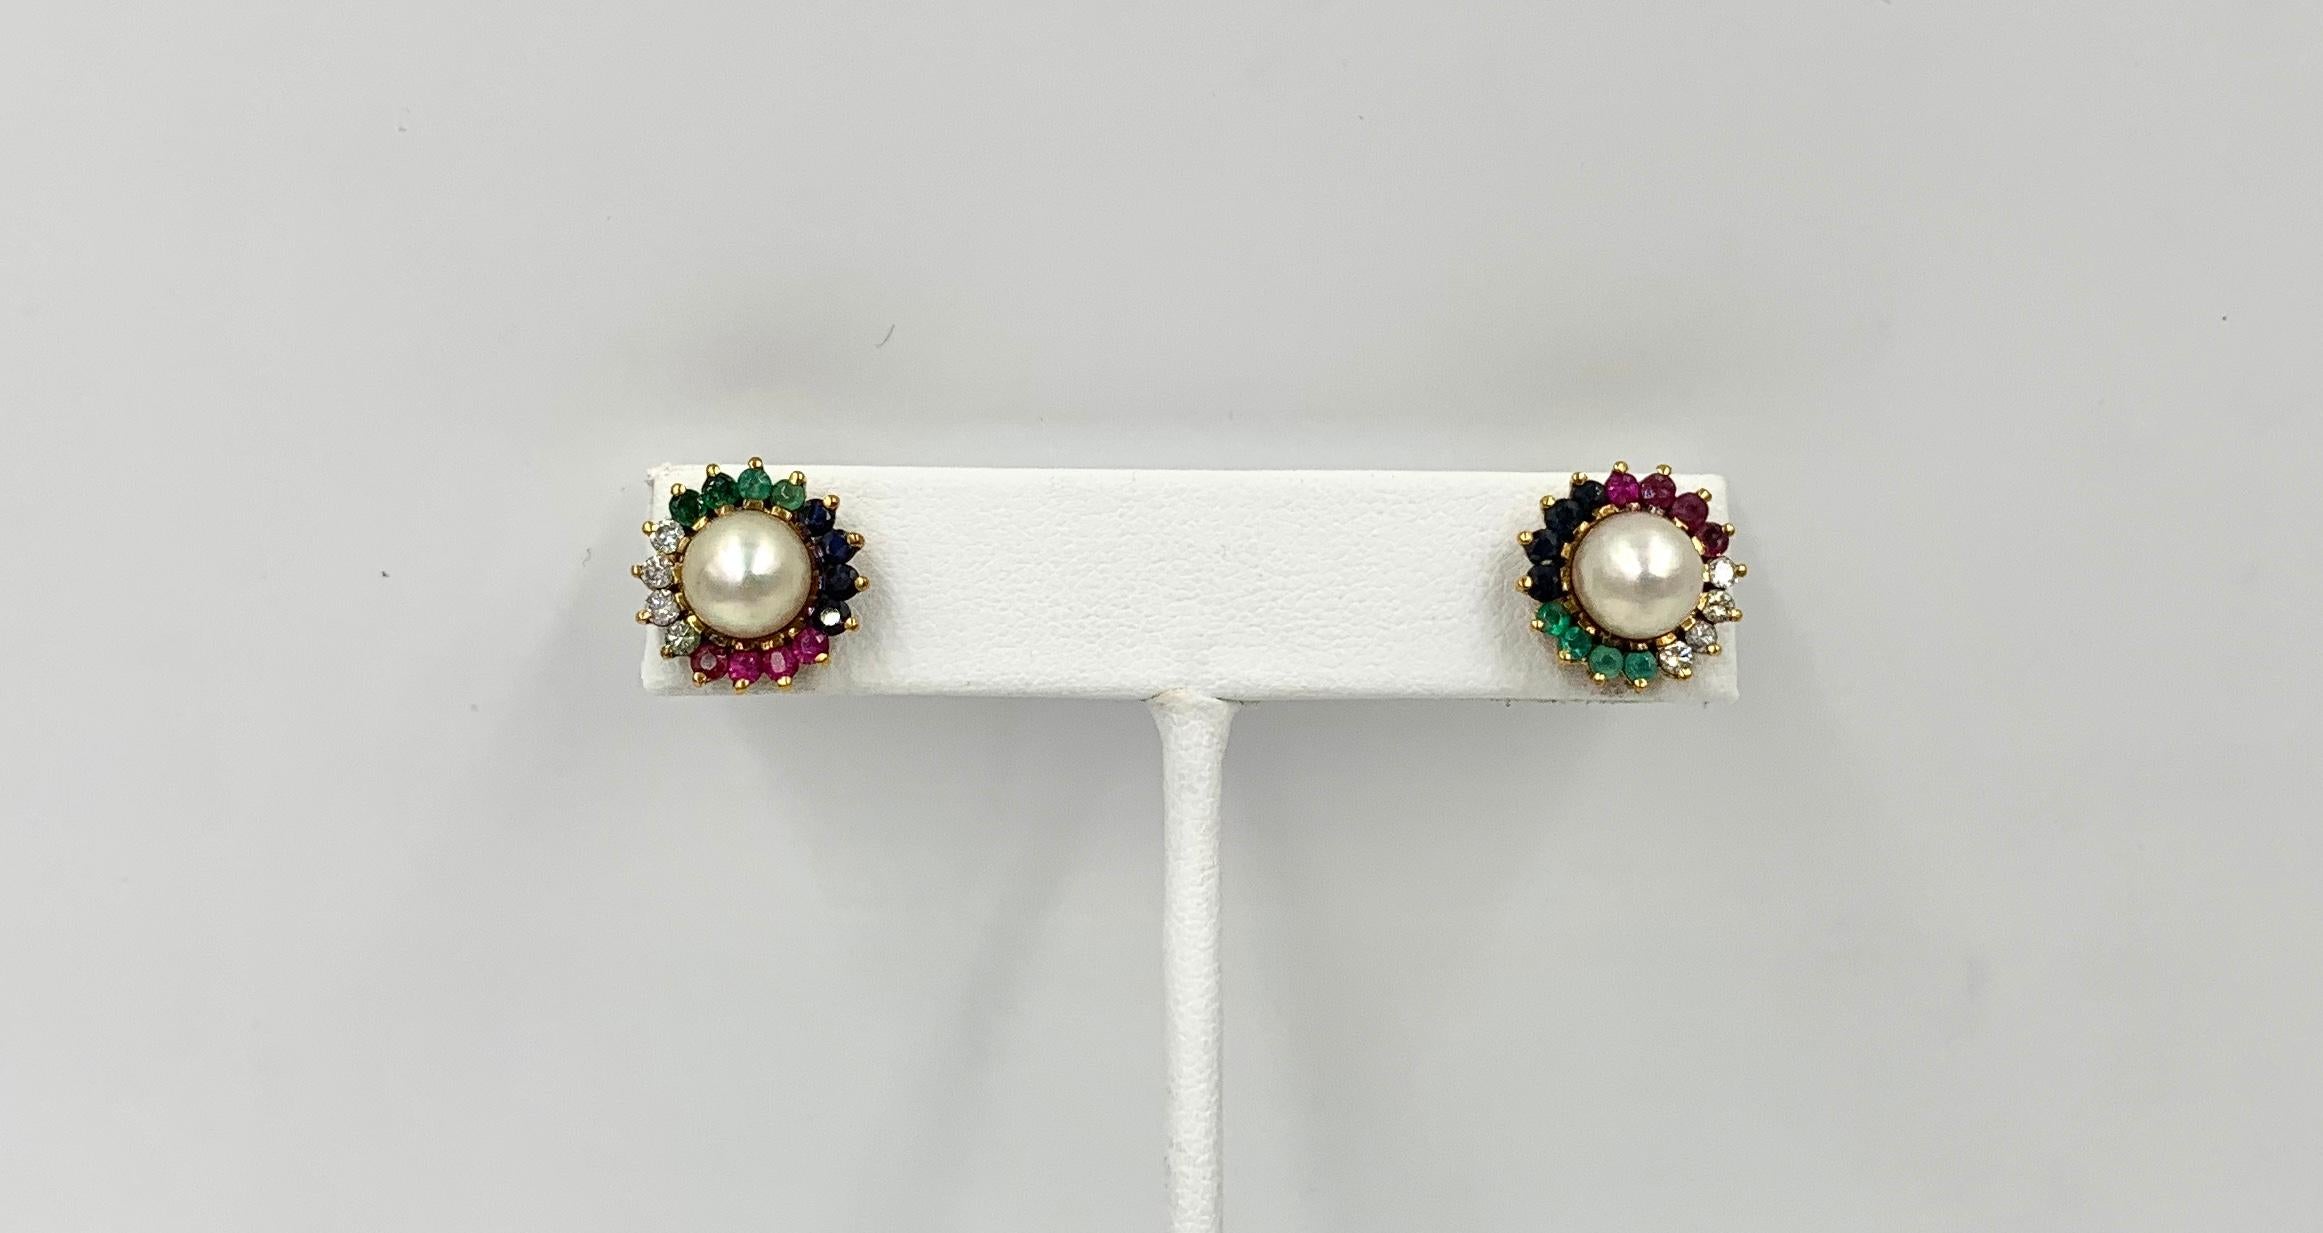 A stunning pair of Multi Gem Earrings with Emerald, Sapphire, Ruby, and Diamond gems surrounding a luscious white Pearl.  Each earring has four Emeralds, Rubies, Sapphires and Diamonds surrounding the 7.5mm pearl.  I love the radiant colors of all